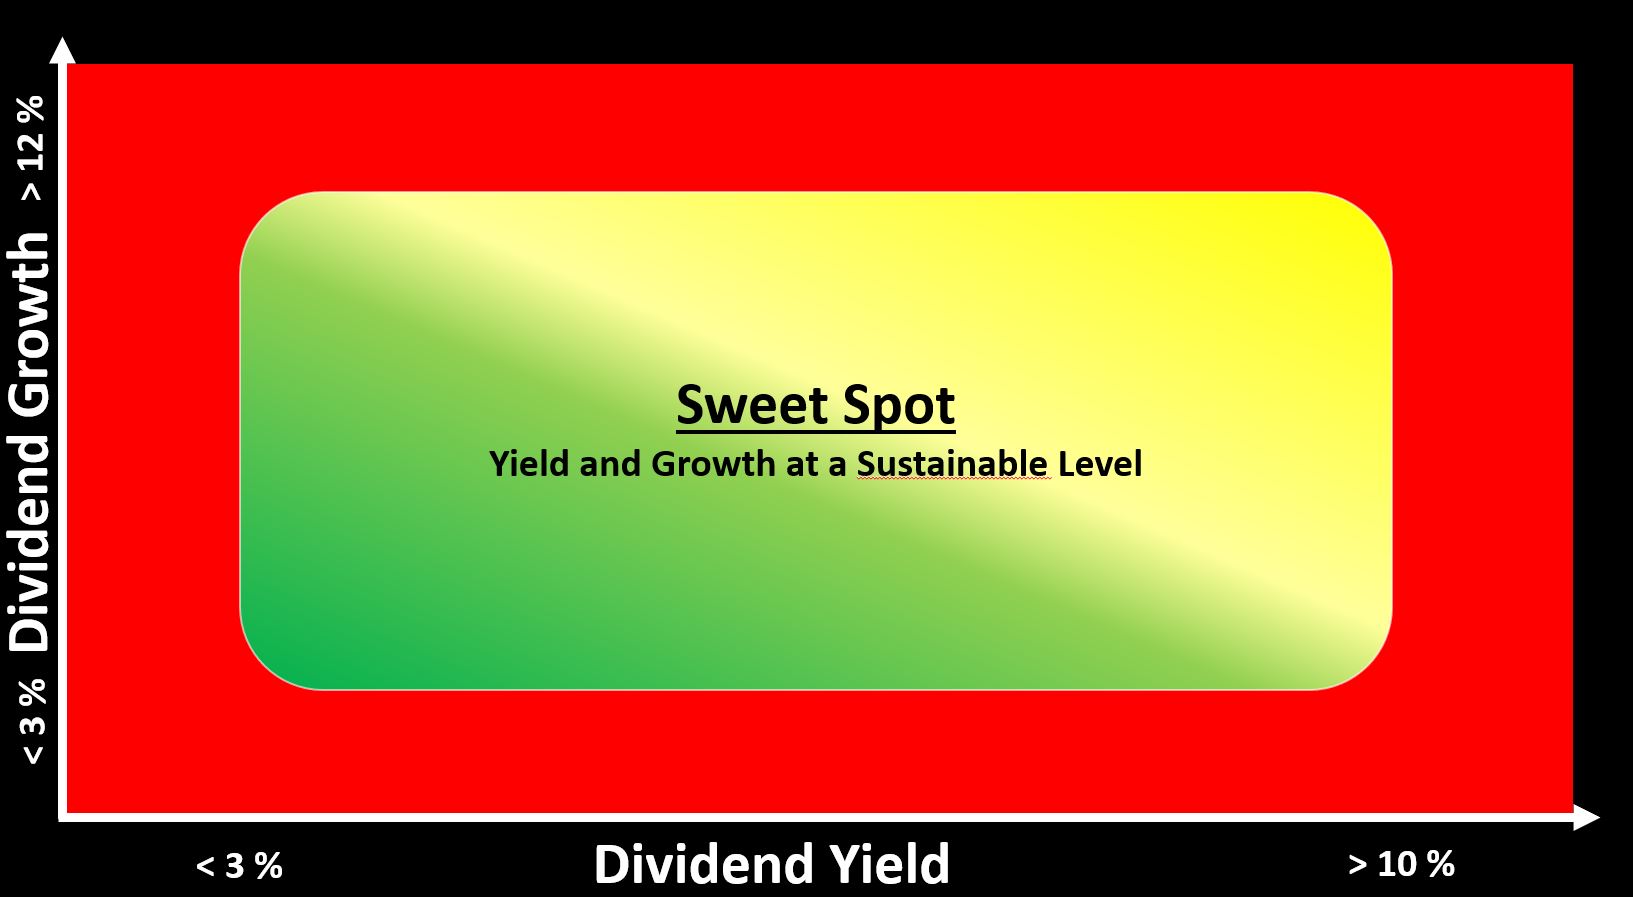 high yield vs dividend growth - sweetspot